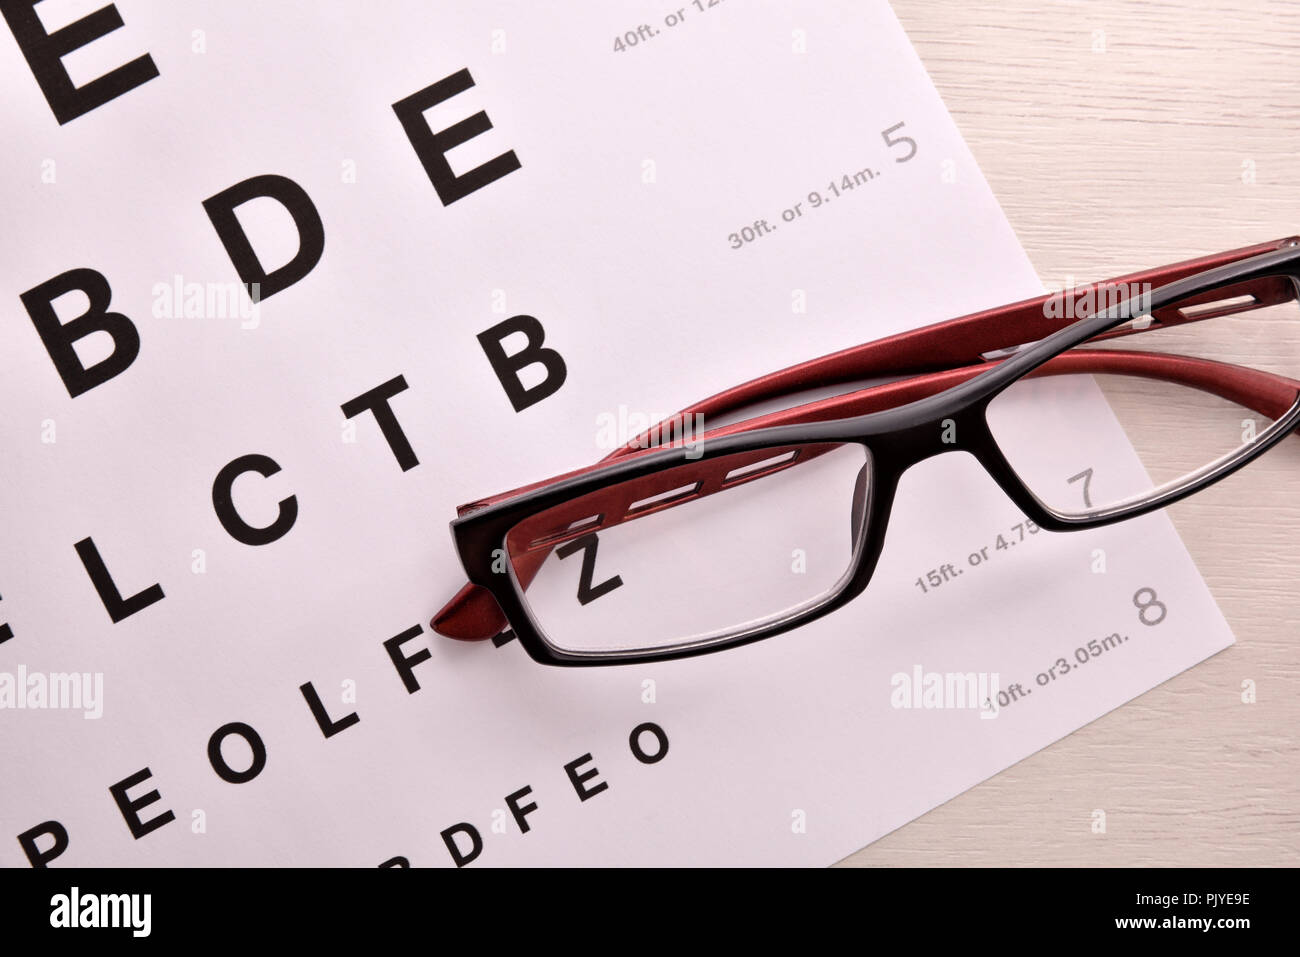 Concept of eye revision with sheet with letters and correction glasses. Top view. Horizontal composition Stock Photo